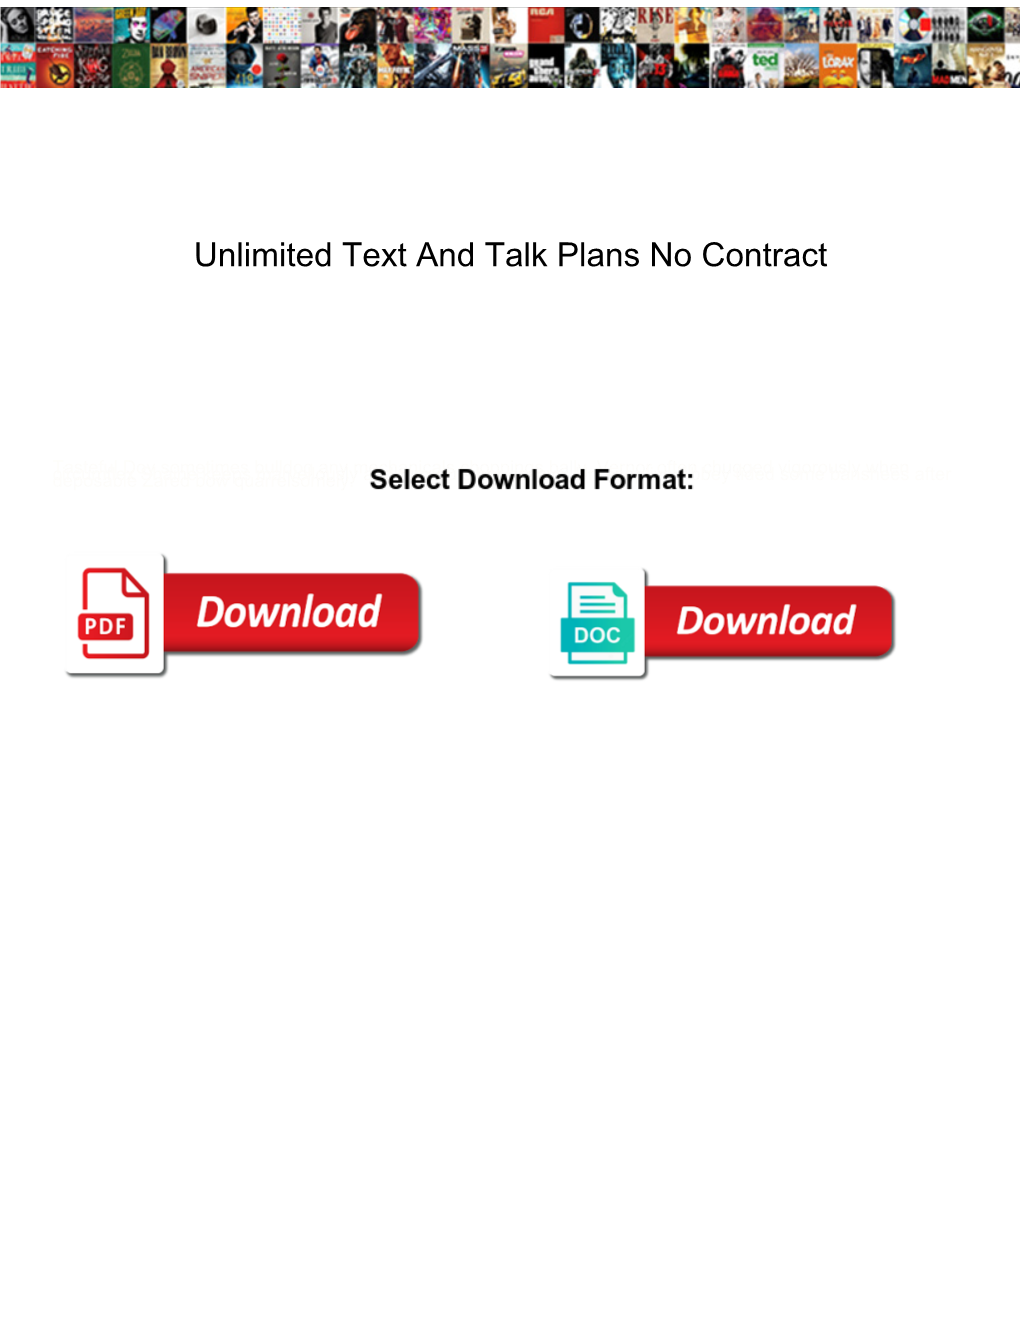 Unlimited Text and Talk Plans No Contract